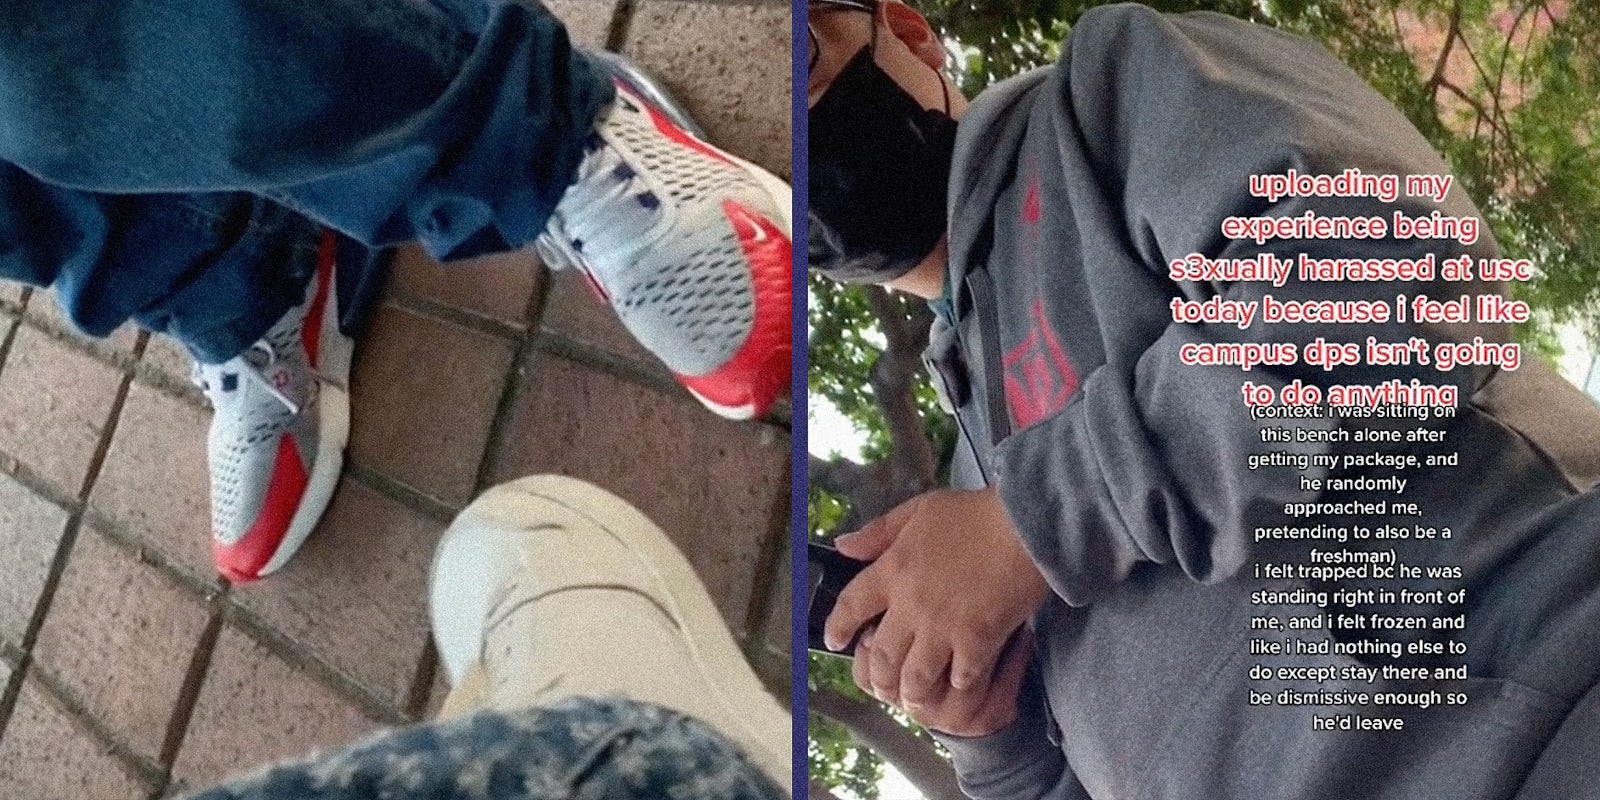 Two people's feet (L) and a guy in a hoodie (R).